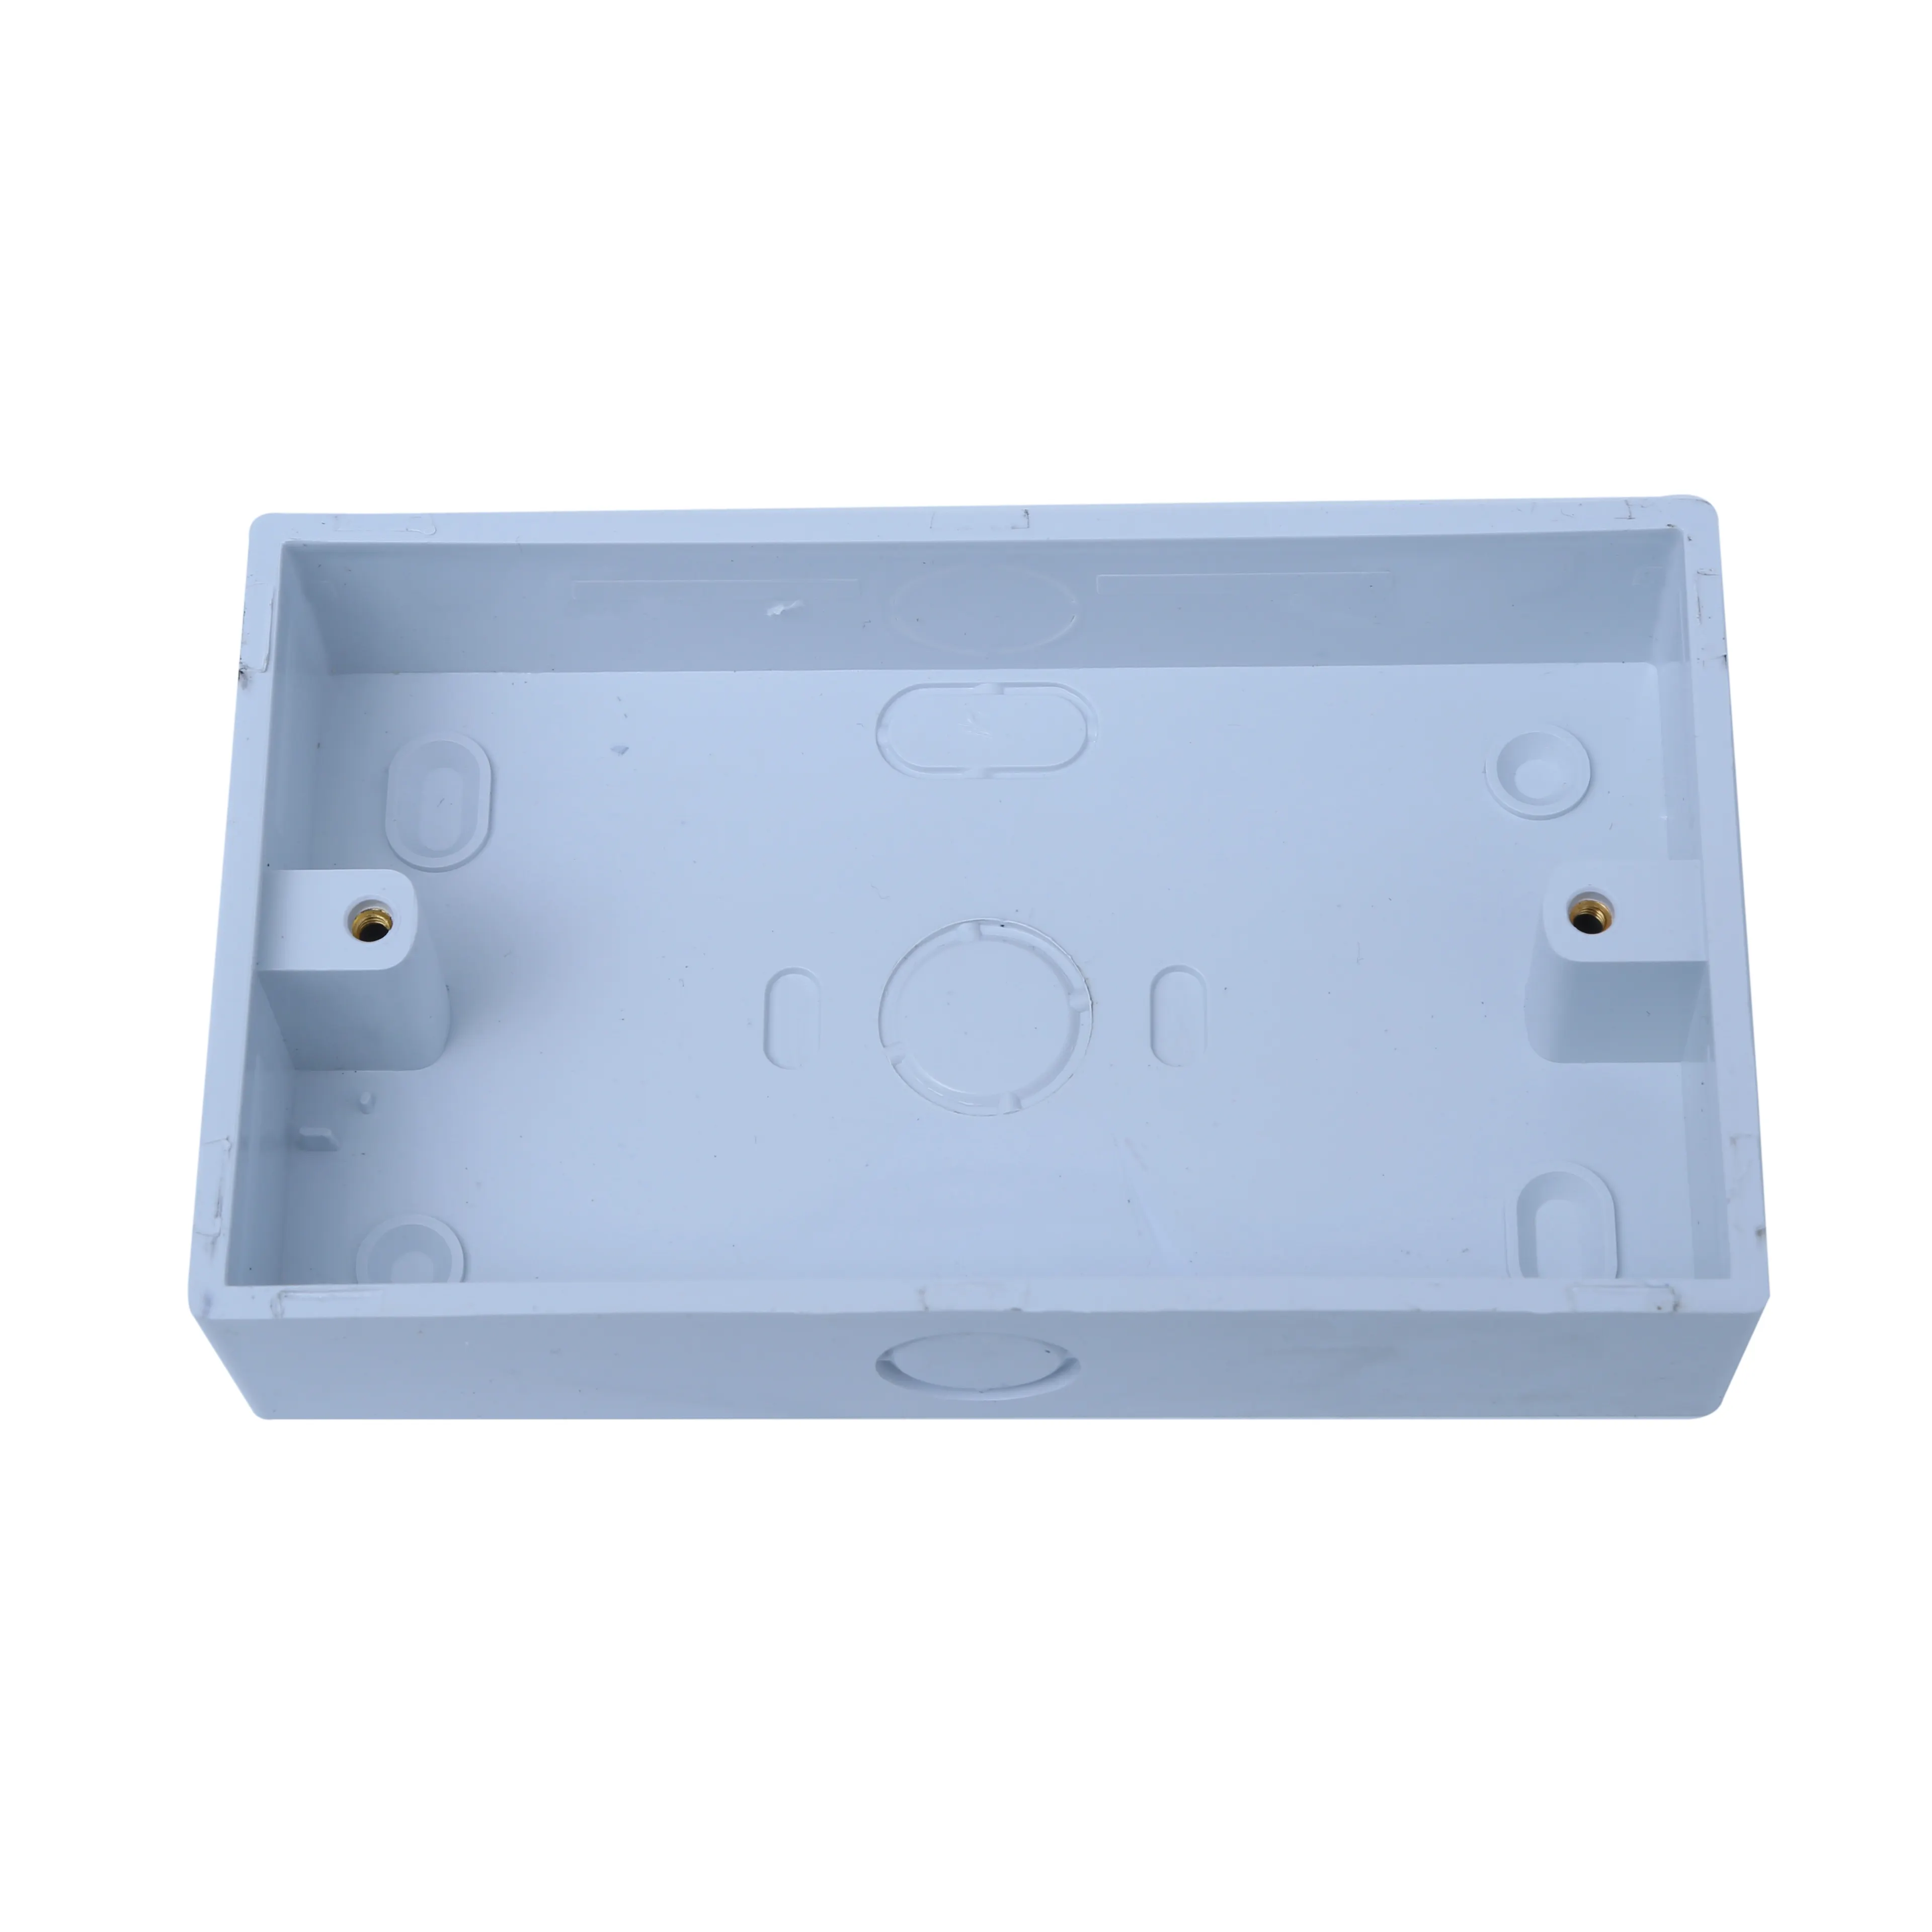 G&N Best Quality Two-Gang Weatherproof Box Seven Hot Sell PVC Electric Junctions Box